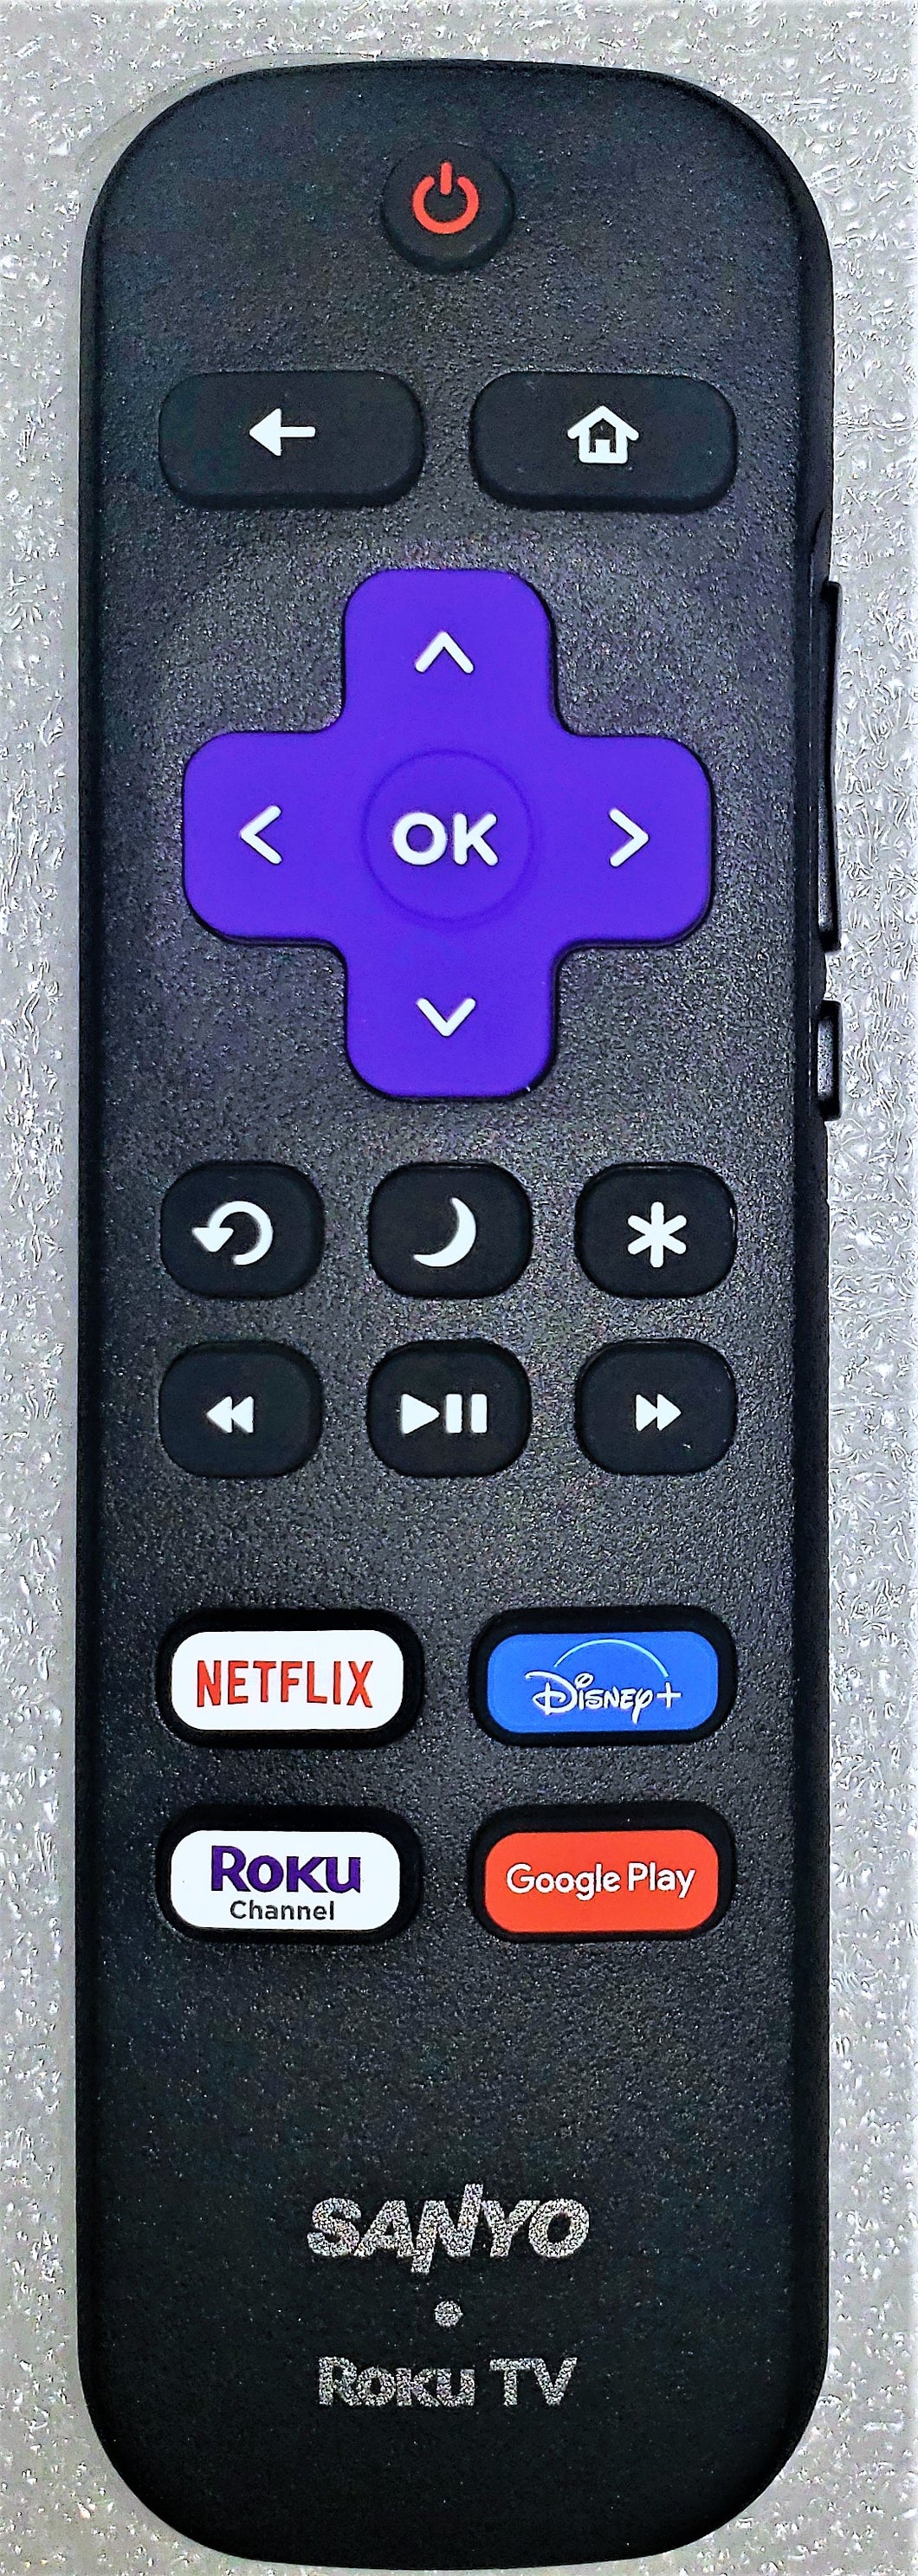 OEM replacement remote control for Sanyo Roku TV URMT21CND021